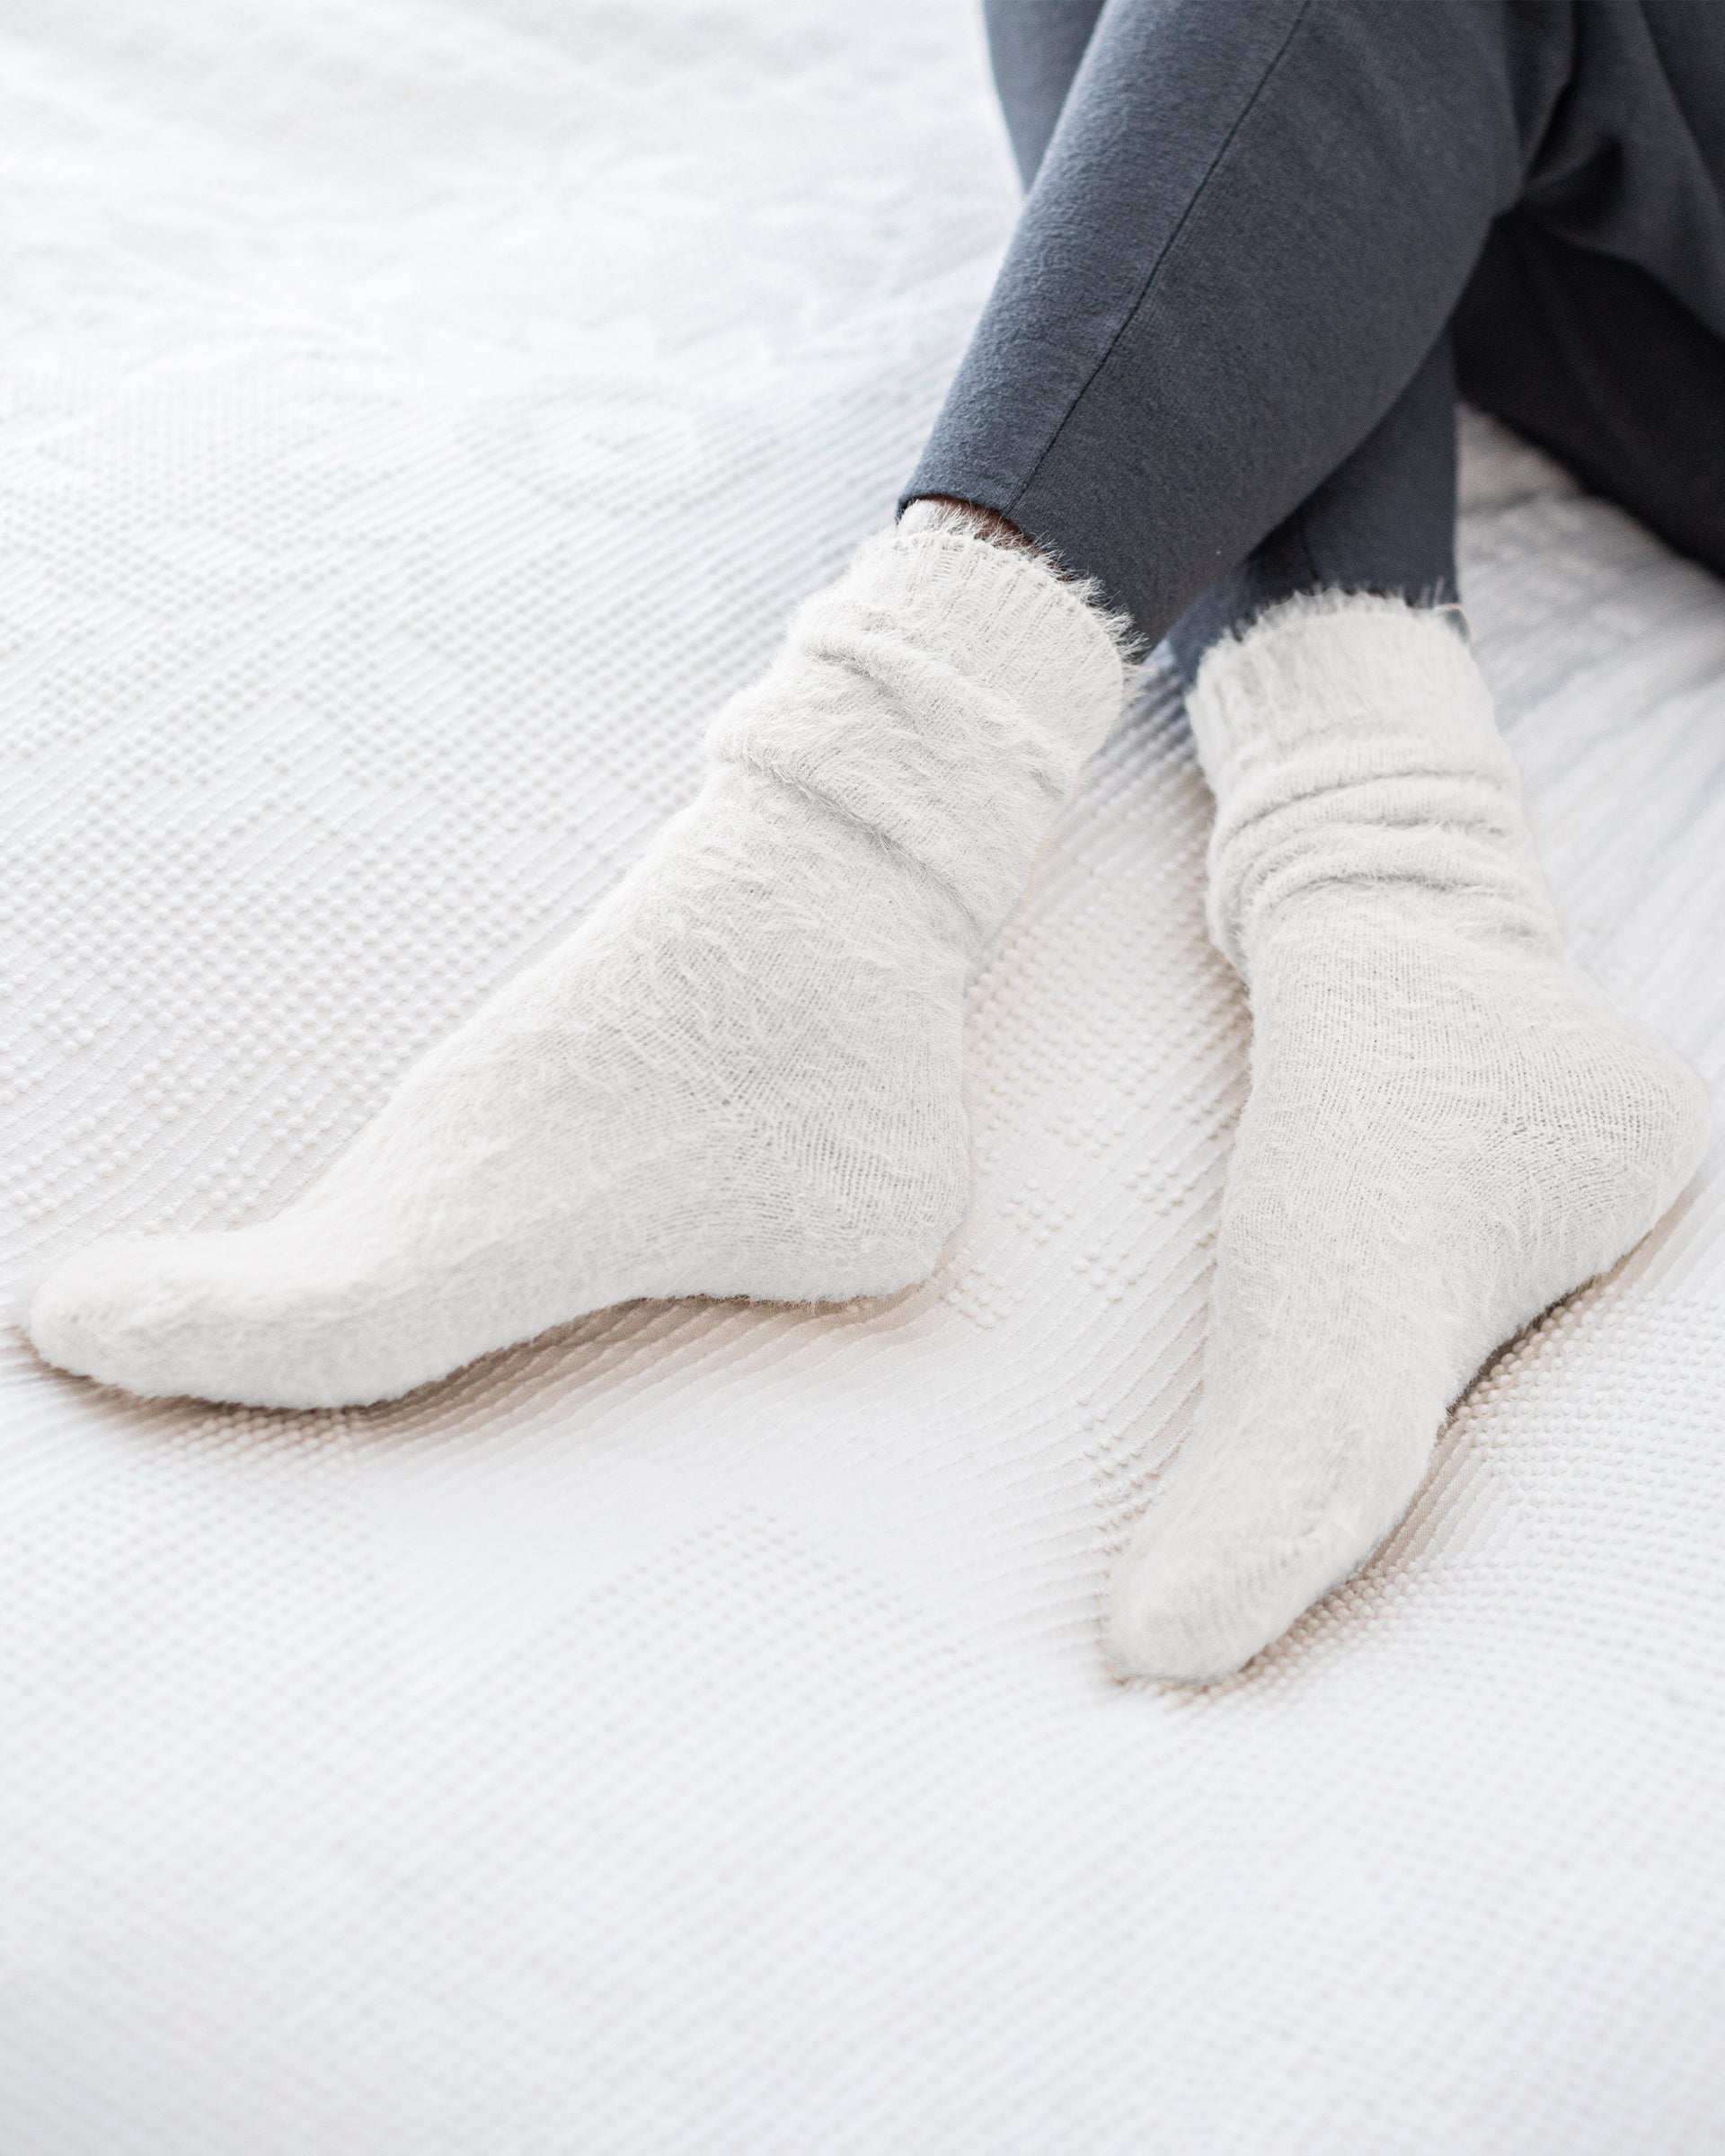 female wearing white fuzzy socks sitting on a bed with her legs crossed on a white comforter 